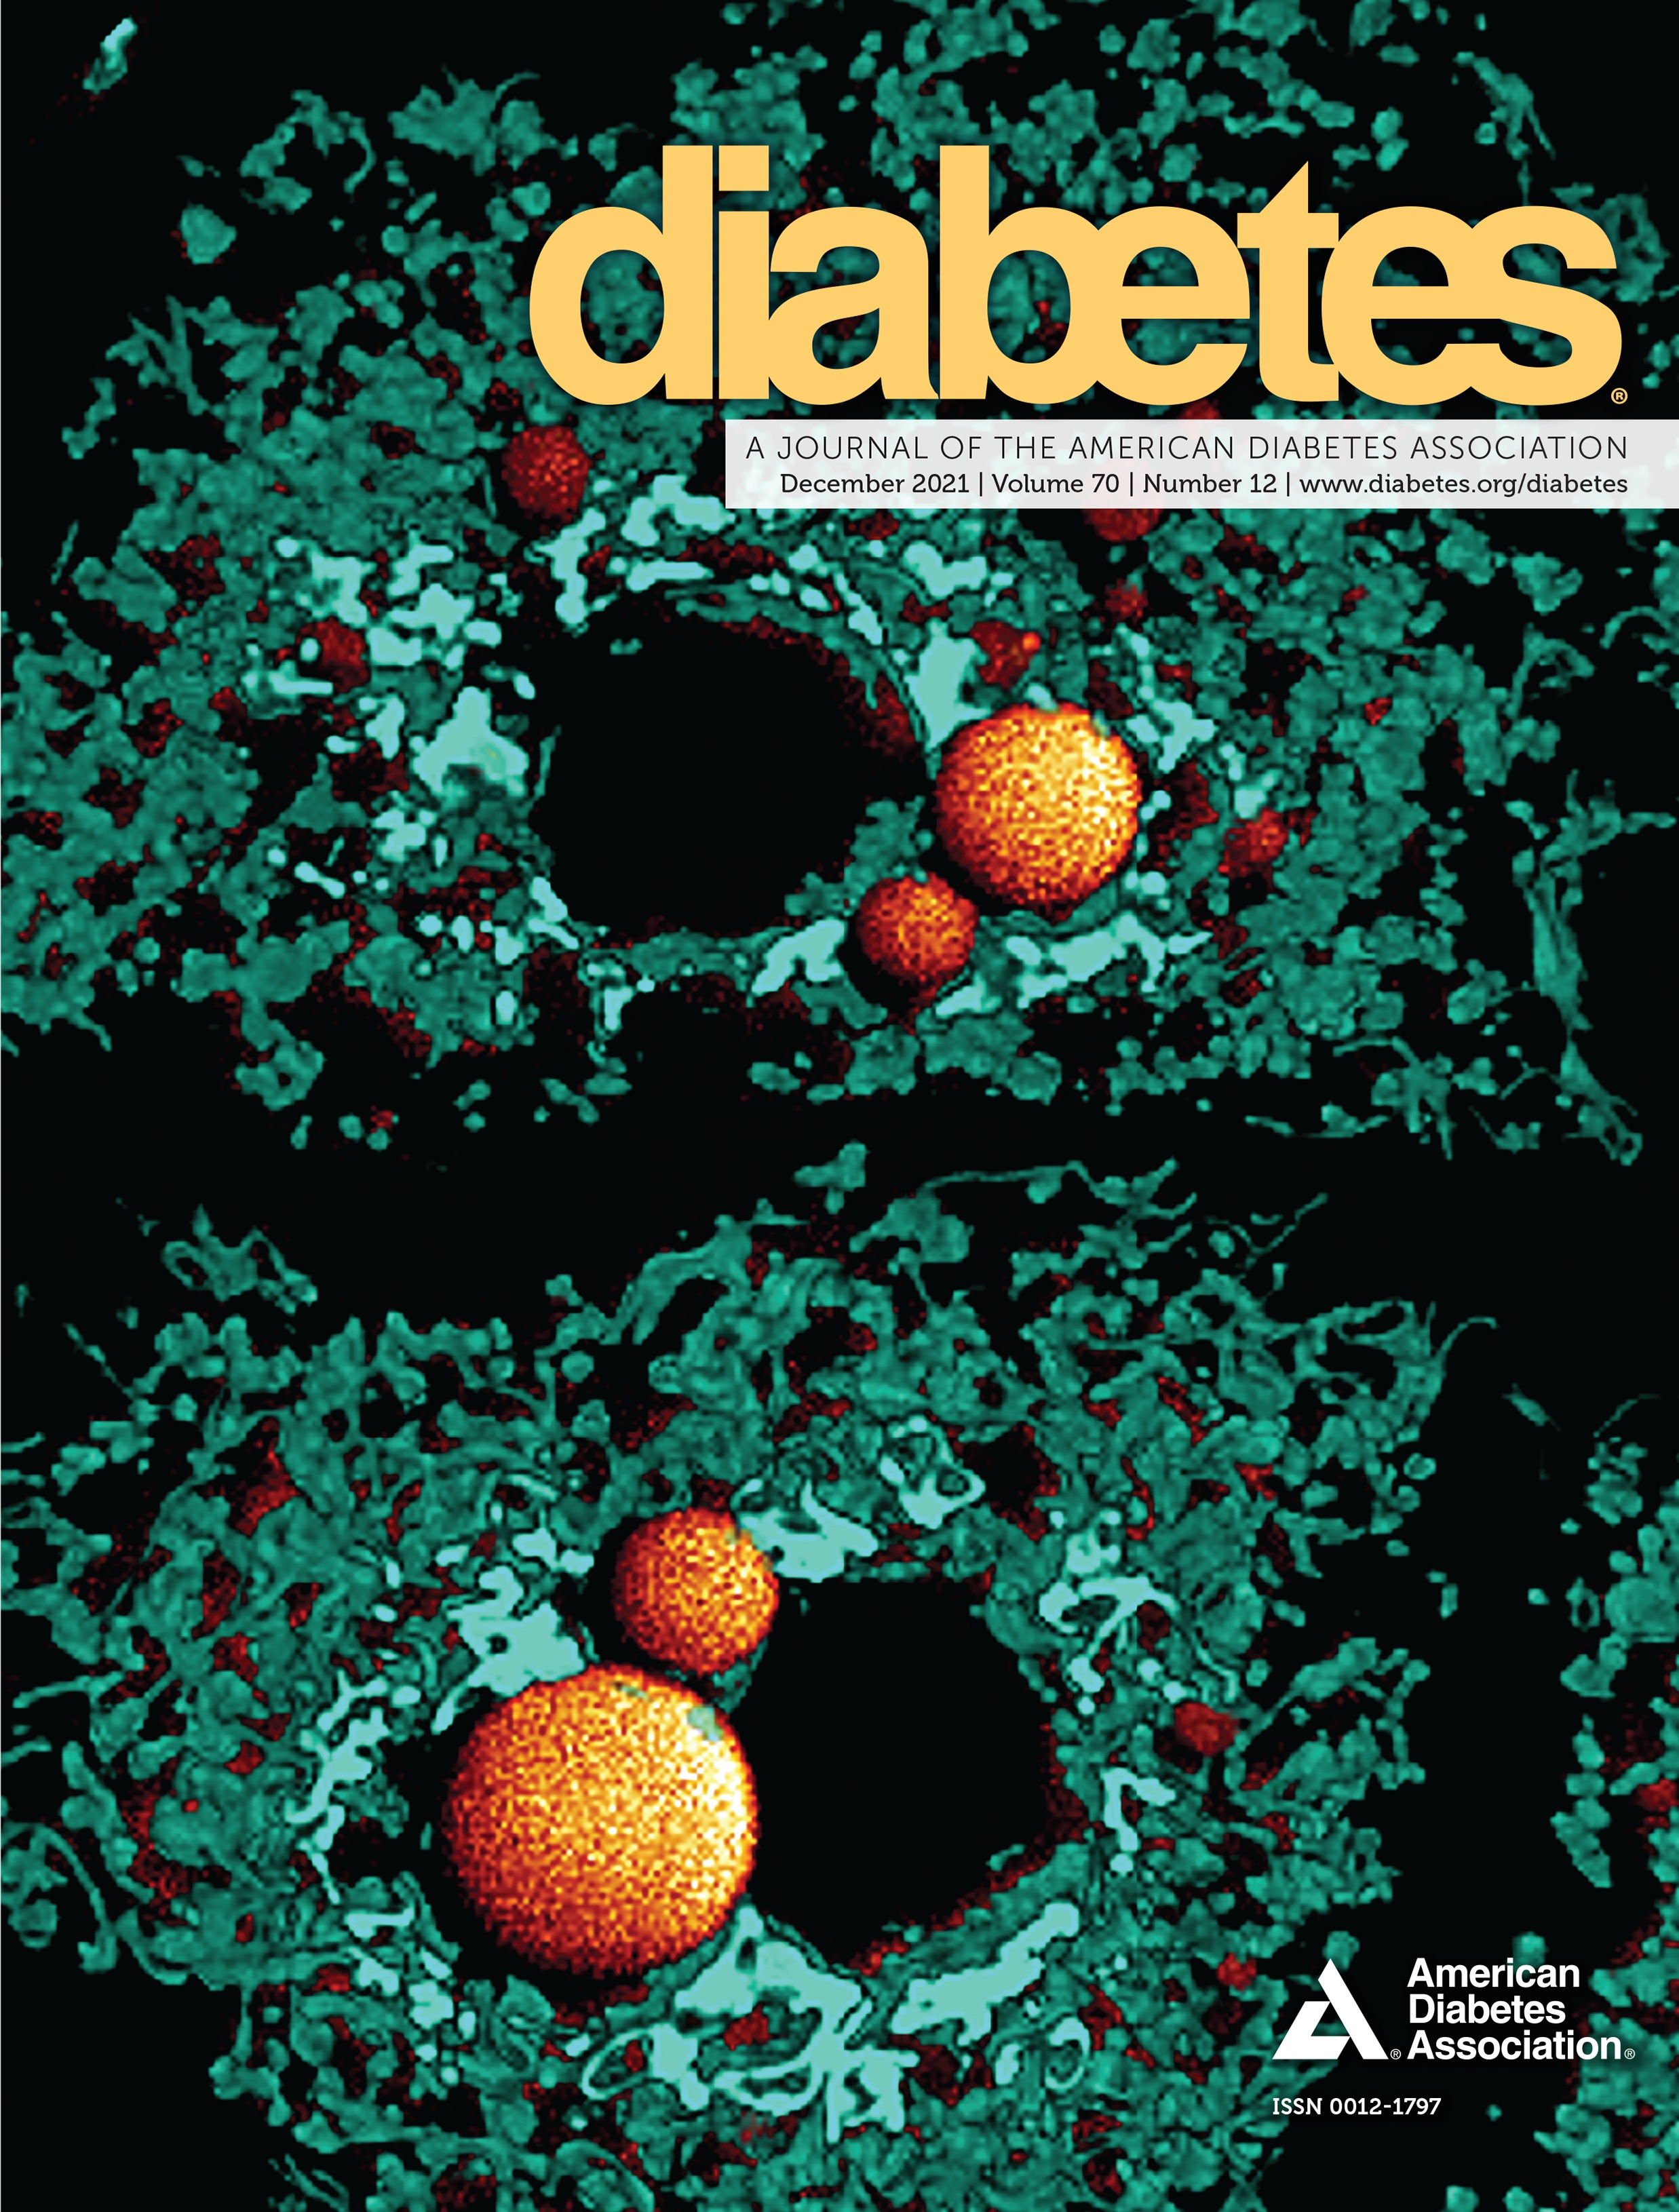 Novel Human Insulin Isoforms and C{alpha}-Peptide Product in Islets of Langerhans and Choroid Plexus